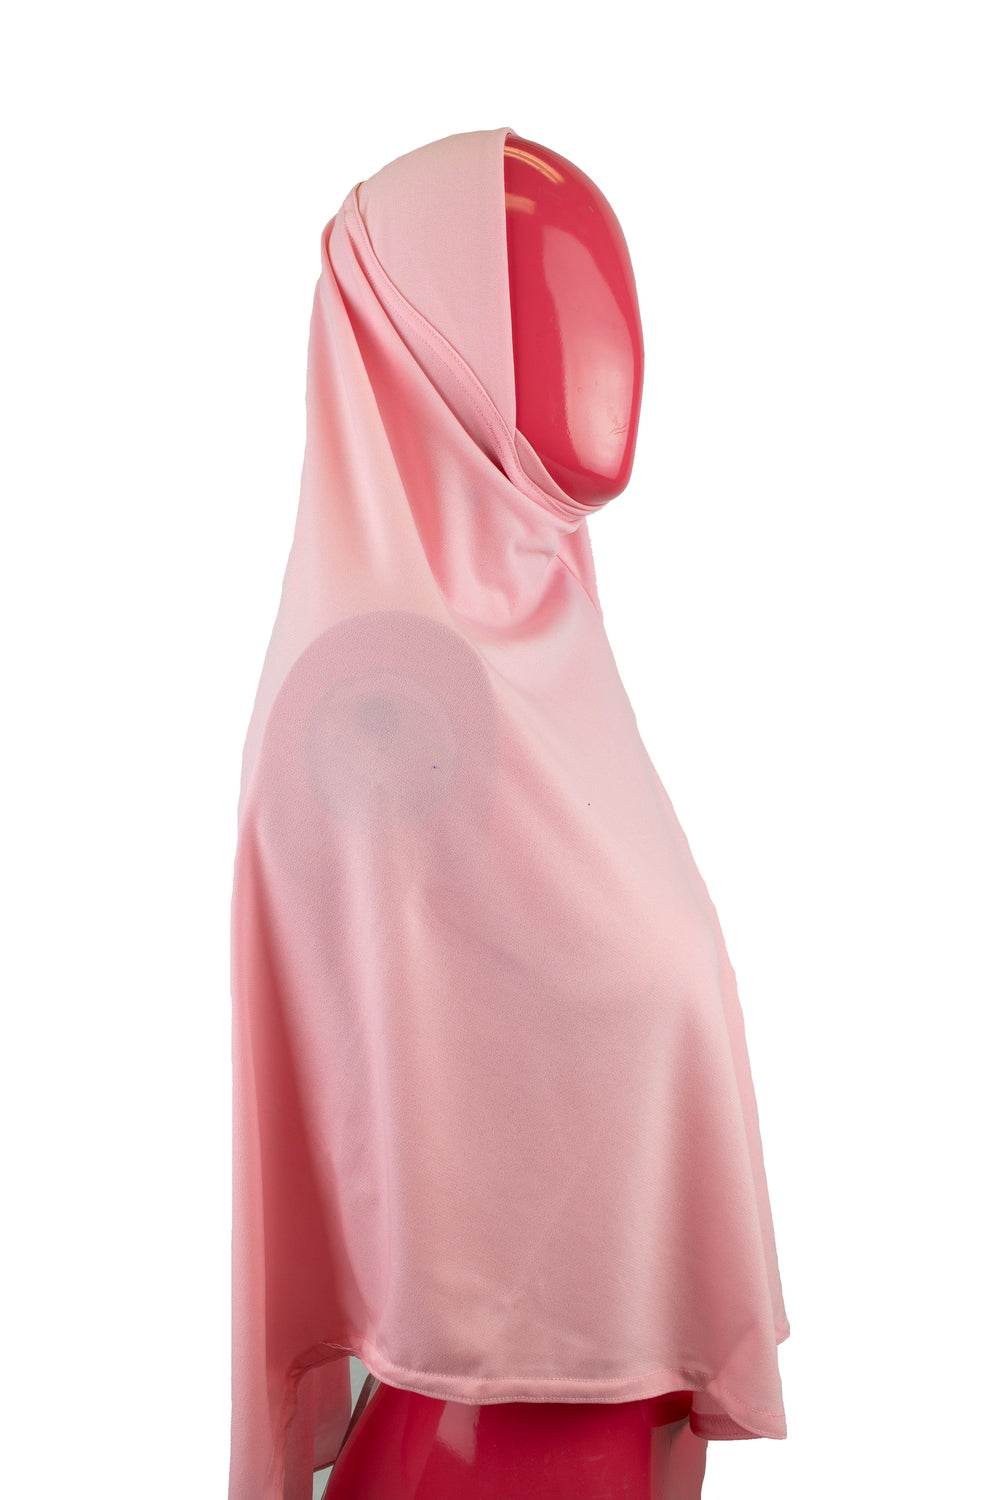 long solid light pink one piece slip on hijab